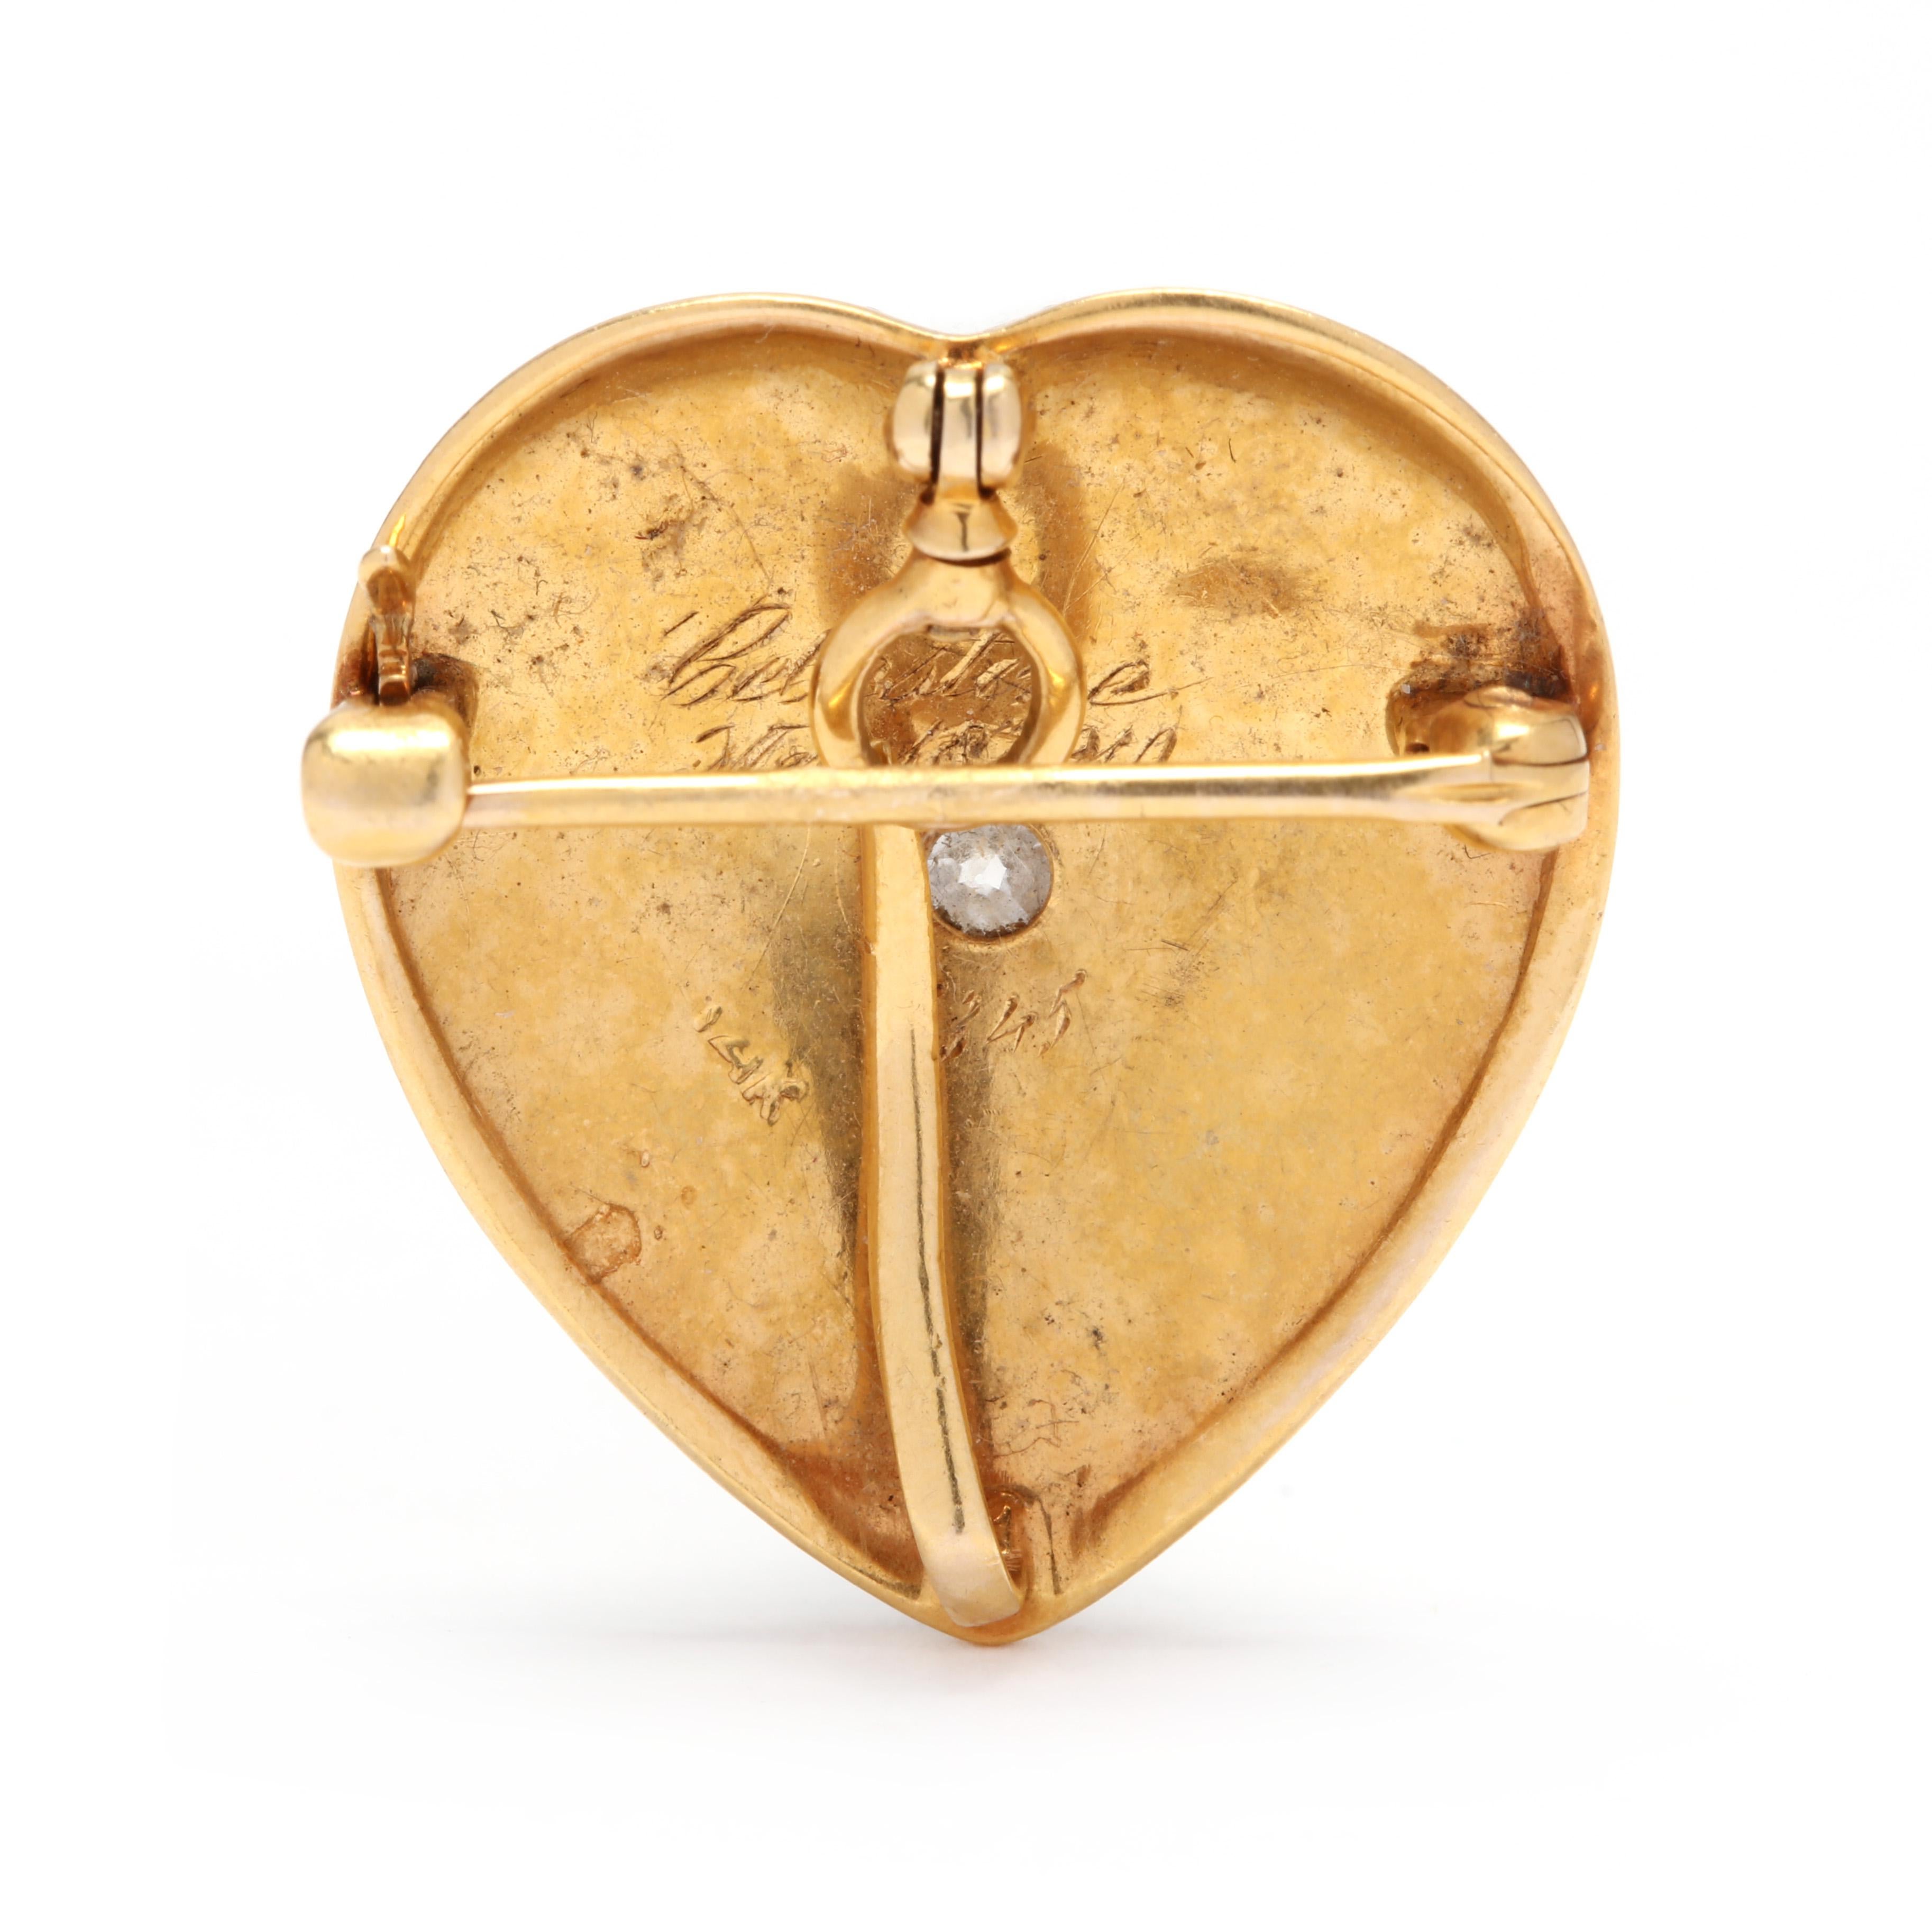 An antique 14 karat yellow gold diamond and seed pearl heart brooch and pendant. This pendant features a heart shape motif with a central old European cut diamond weighing approximately .11 carat surrounded by pavé set seed pearls. This brooch has a